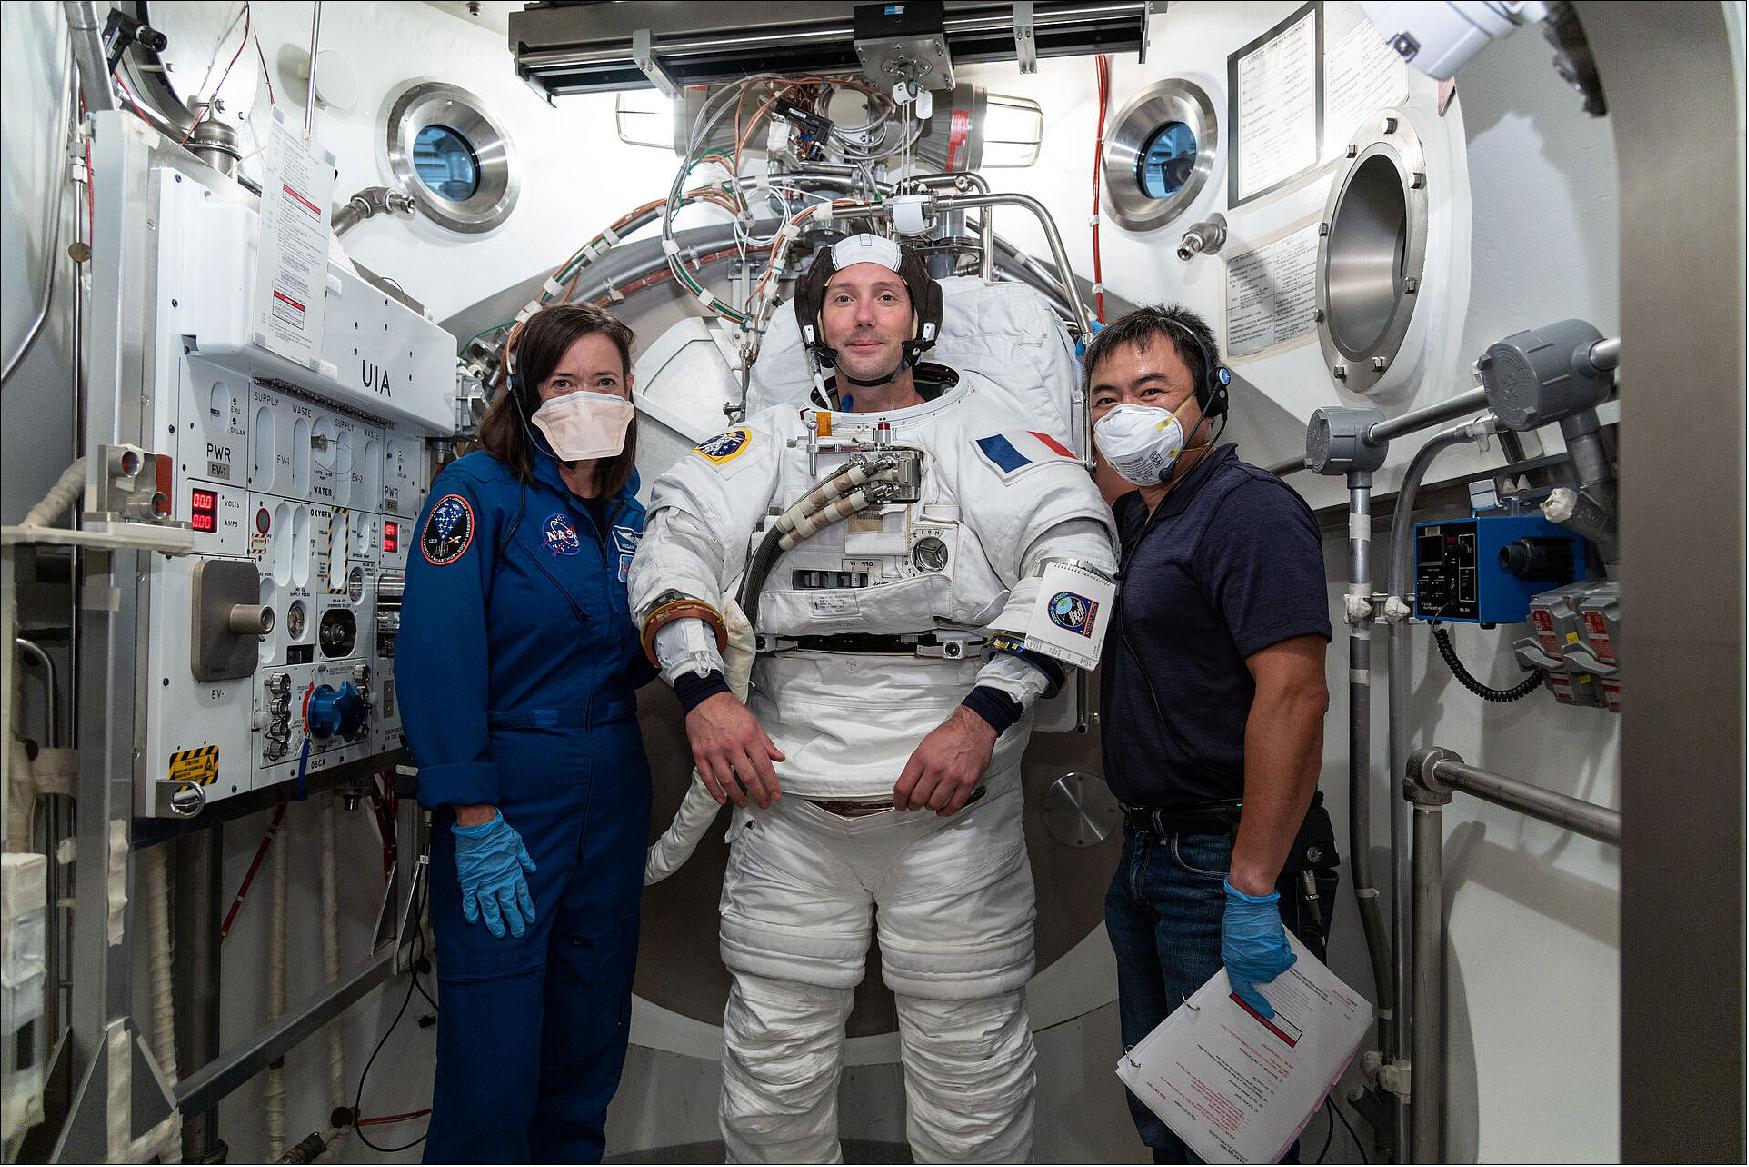 Figure 10: Thomas Pesquet vacuum chamber training. ESA astronaut Thomas Pesquet during a test of the US spacesuit used for spacewalks at NASA's Johnson Space Center, 22 September 2020. To his right is NASA astronaut Megan Behnken and to his left is Japanese astronaut Aki Hoshide who will be launched alongside Thomas and NASA astronaut Shane Kimbrough to the International Space Station in a SpaceX Crew Dragon capsule (image credit: NASA, R. Markowitz)